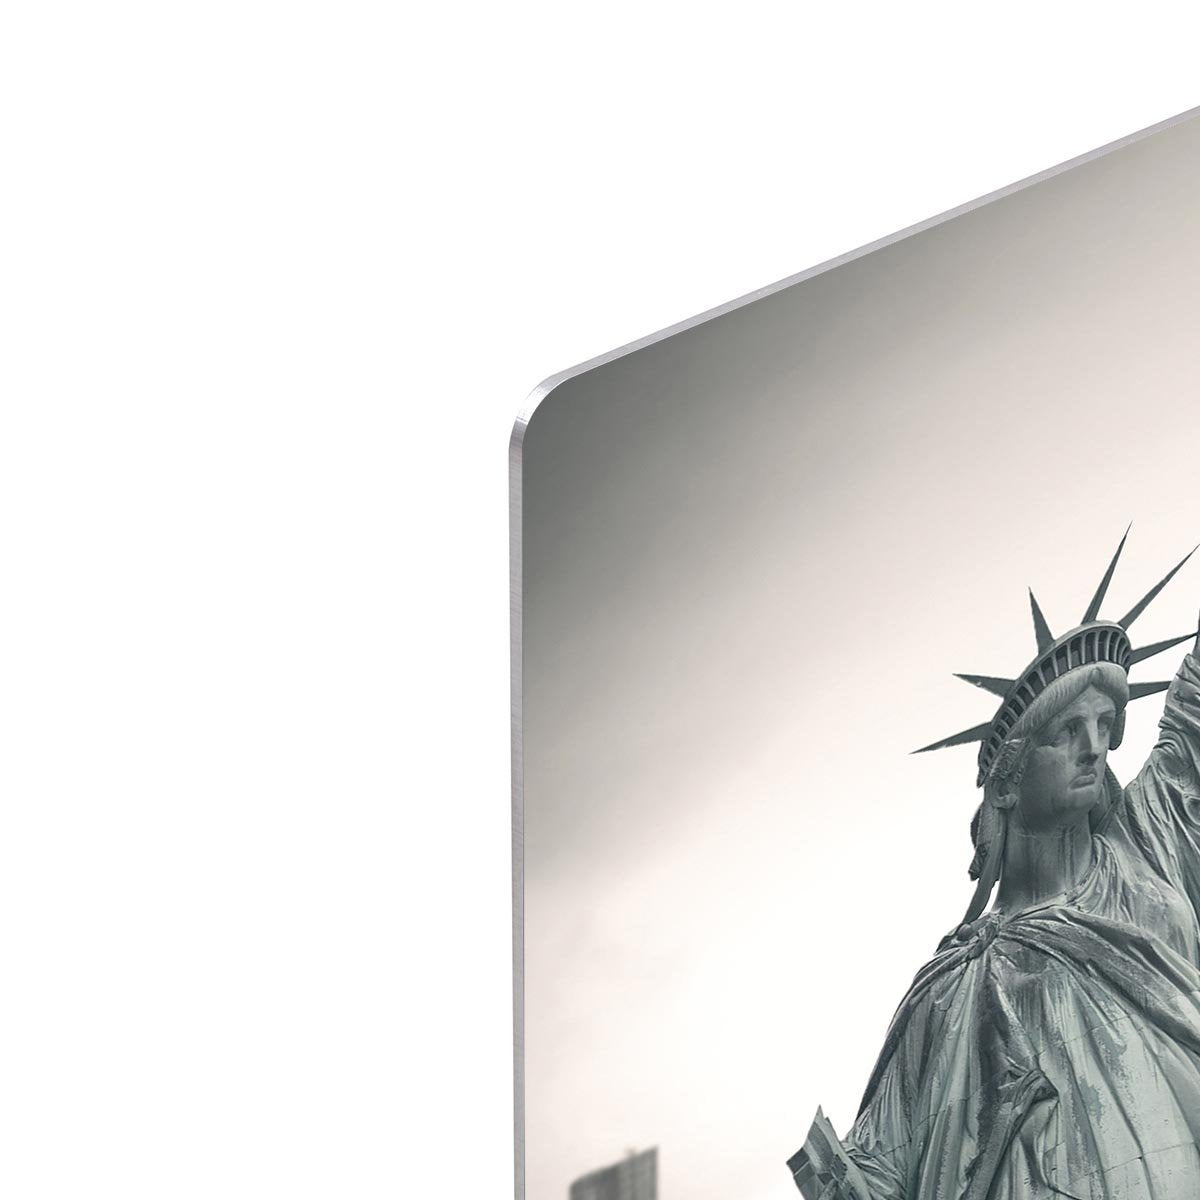 Statue of Liberty with cityscape HD Metal Print